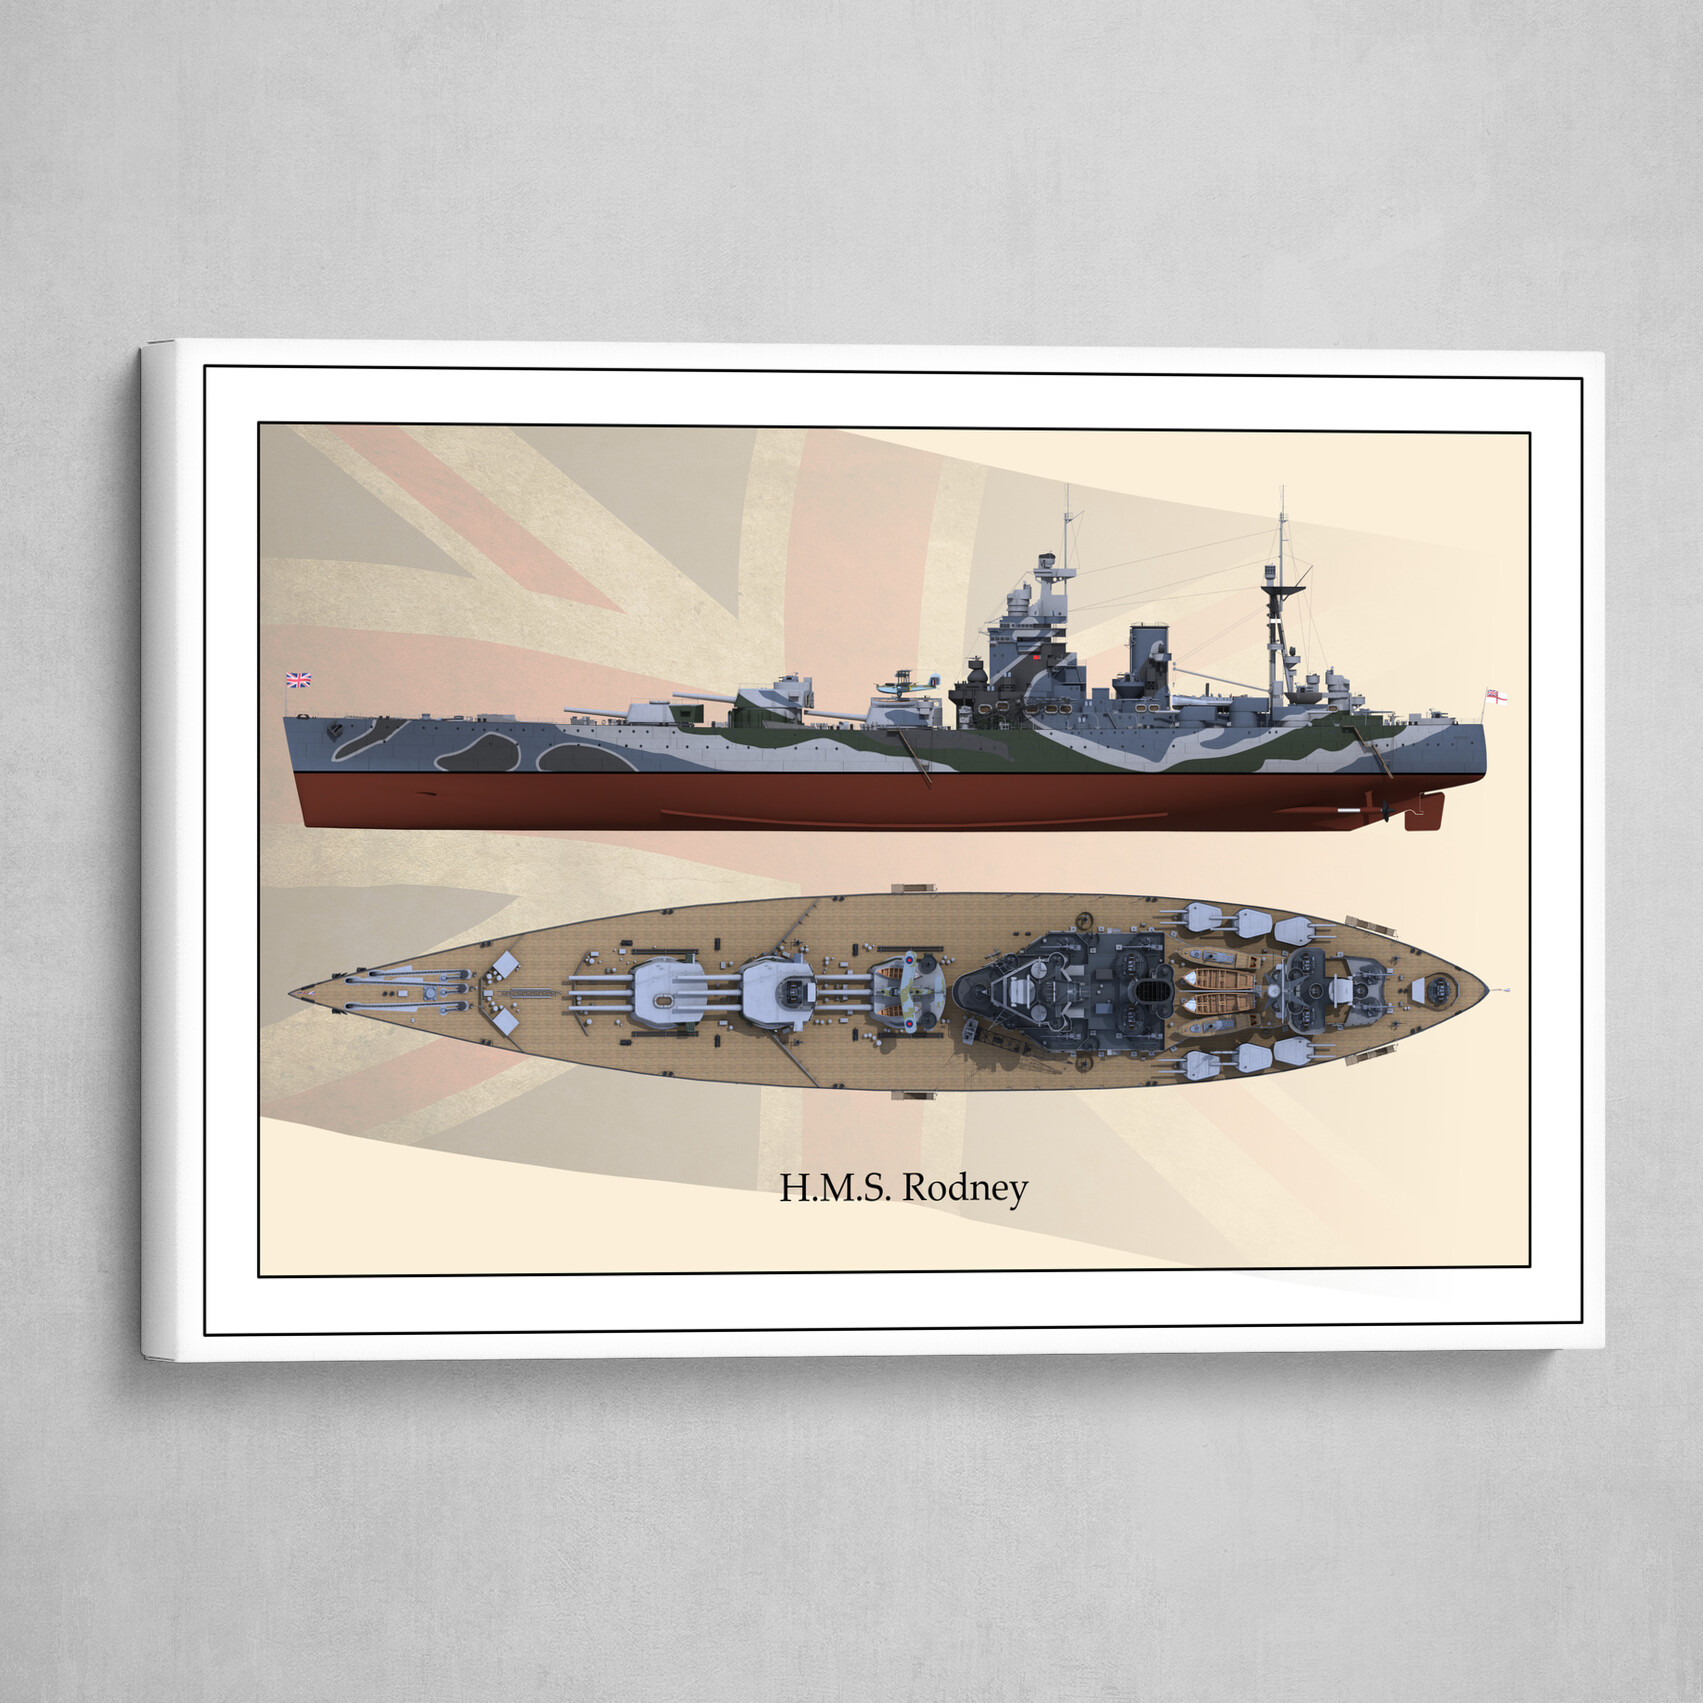 HMS Rodney - portside and top view